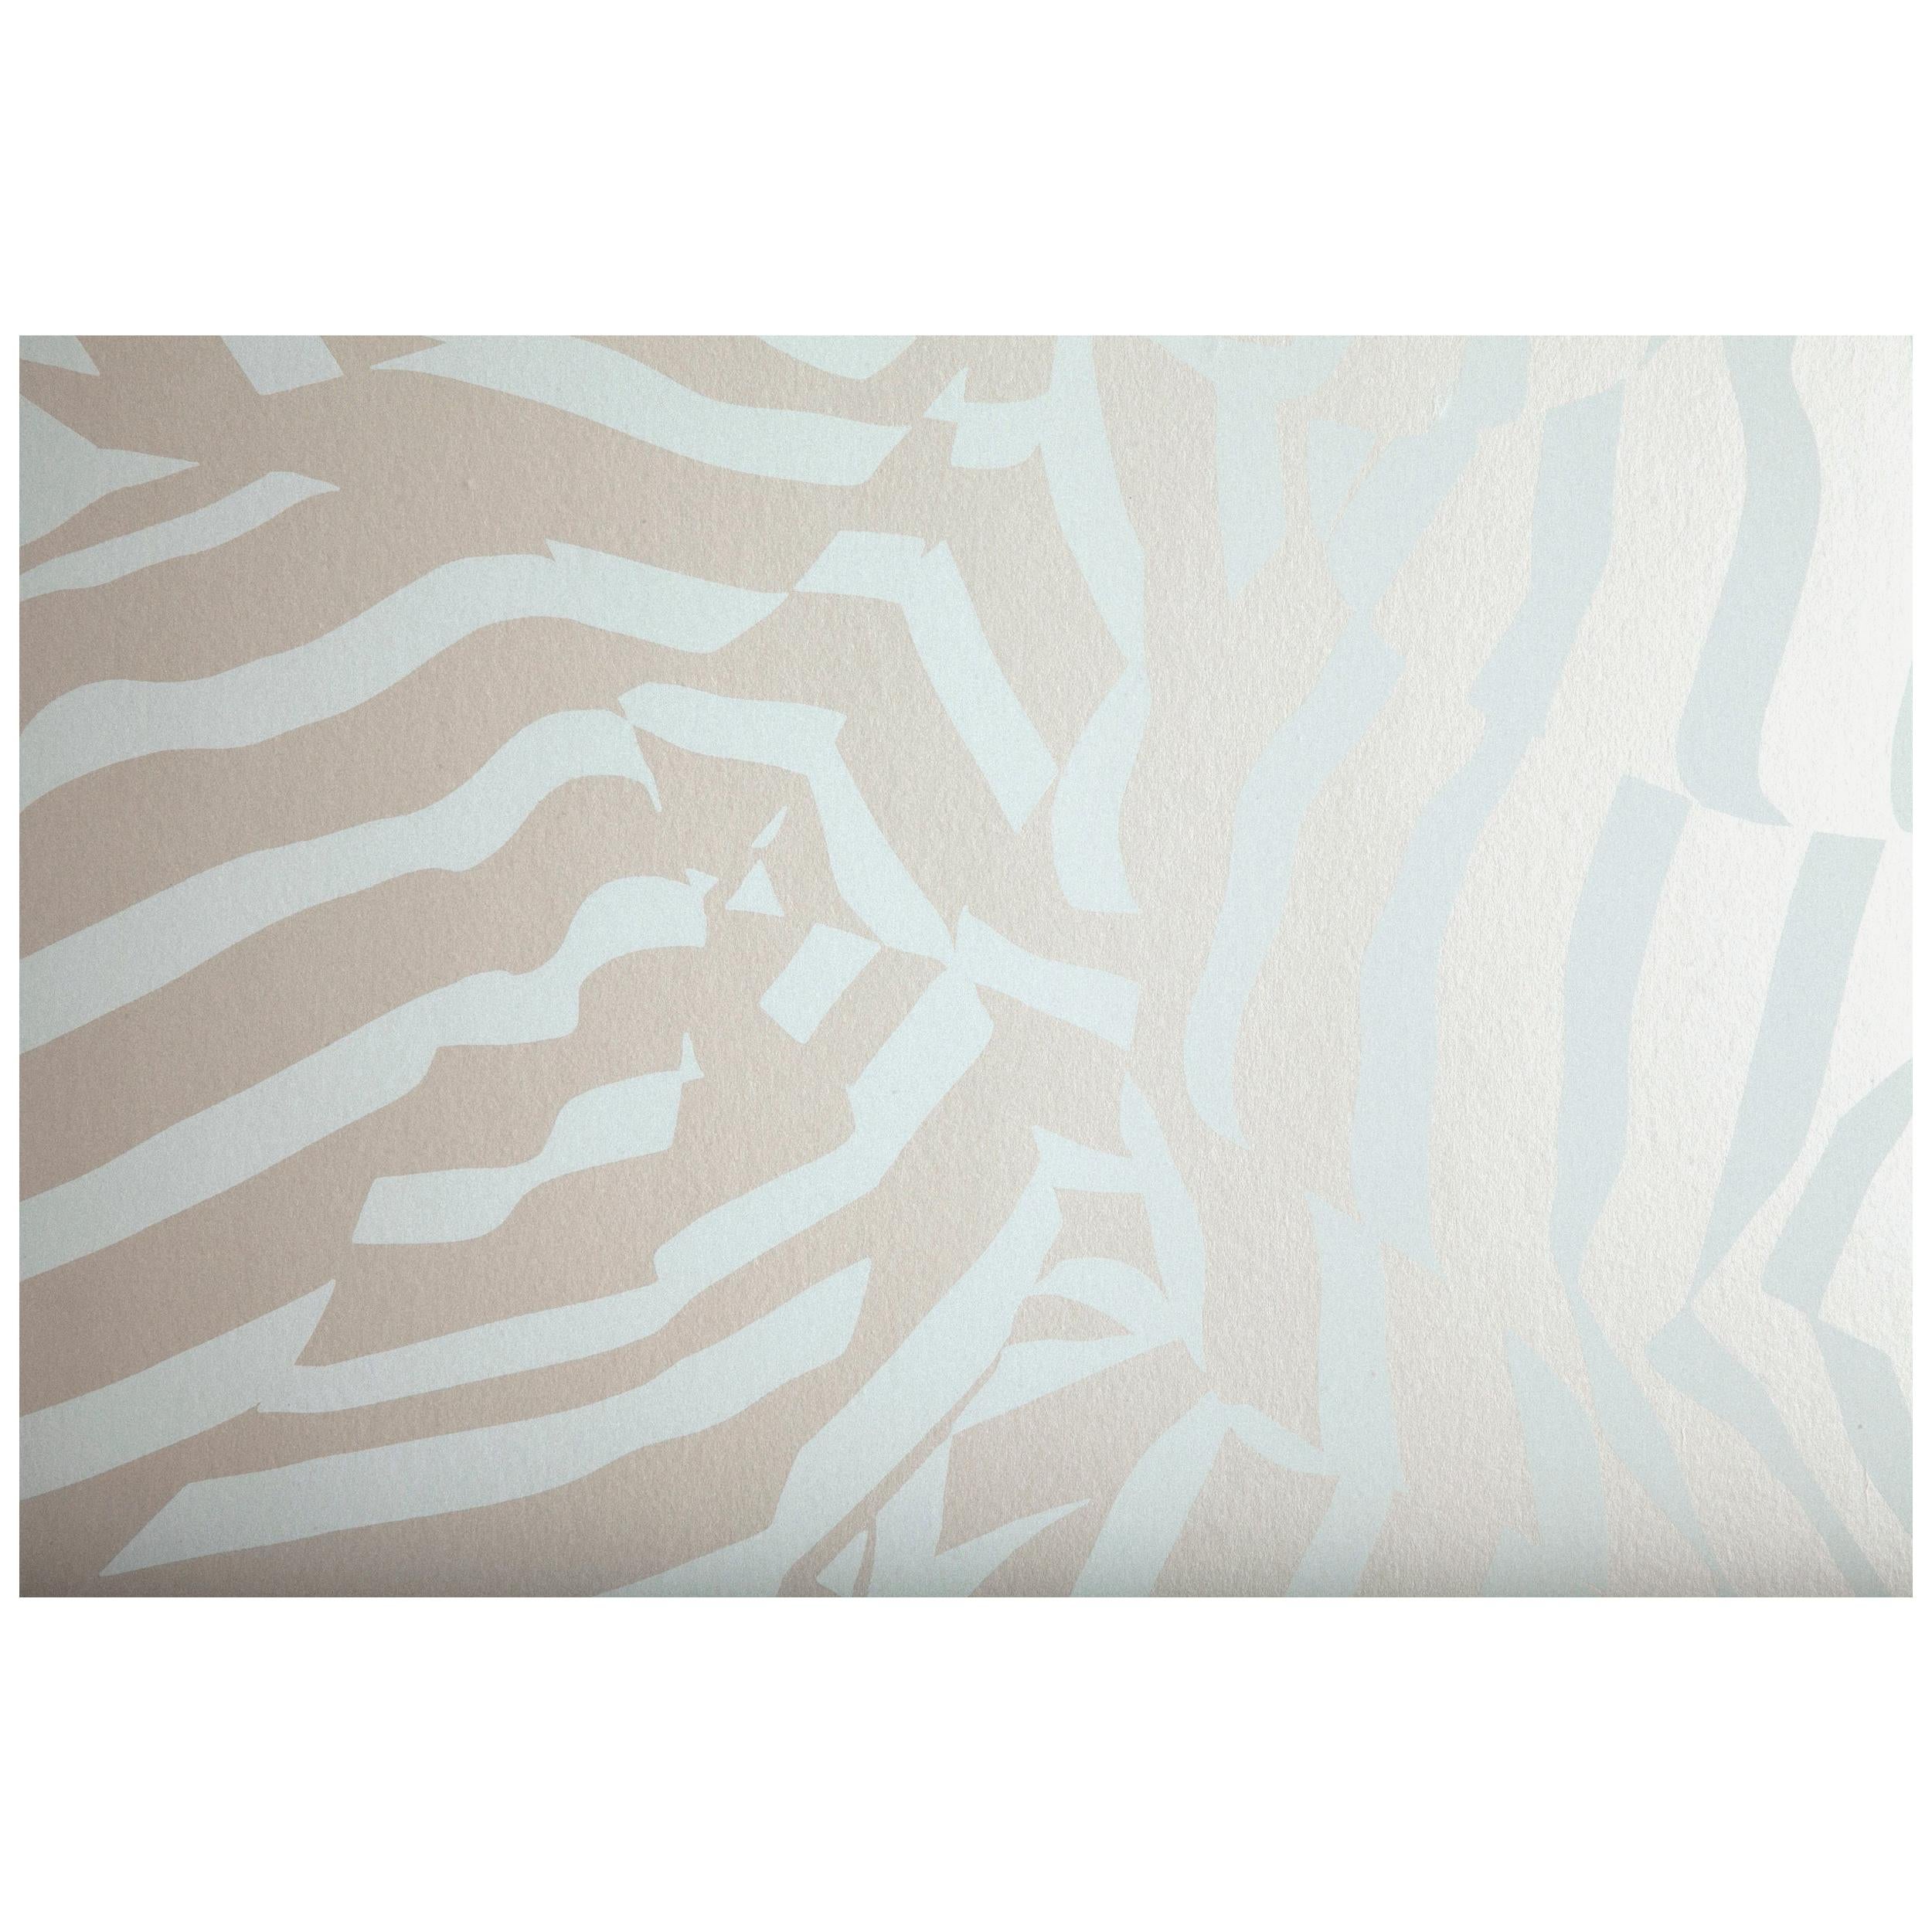 Folded Paper Wallpaper with Light Blue and Pearlescent White Hues im Angebot